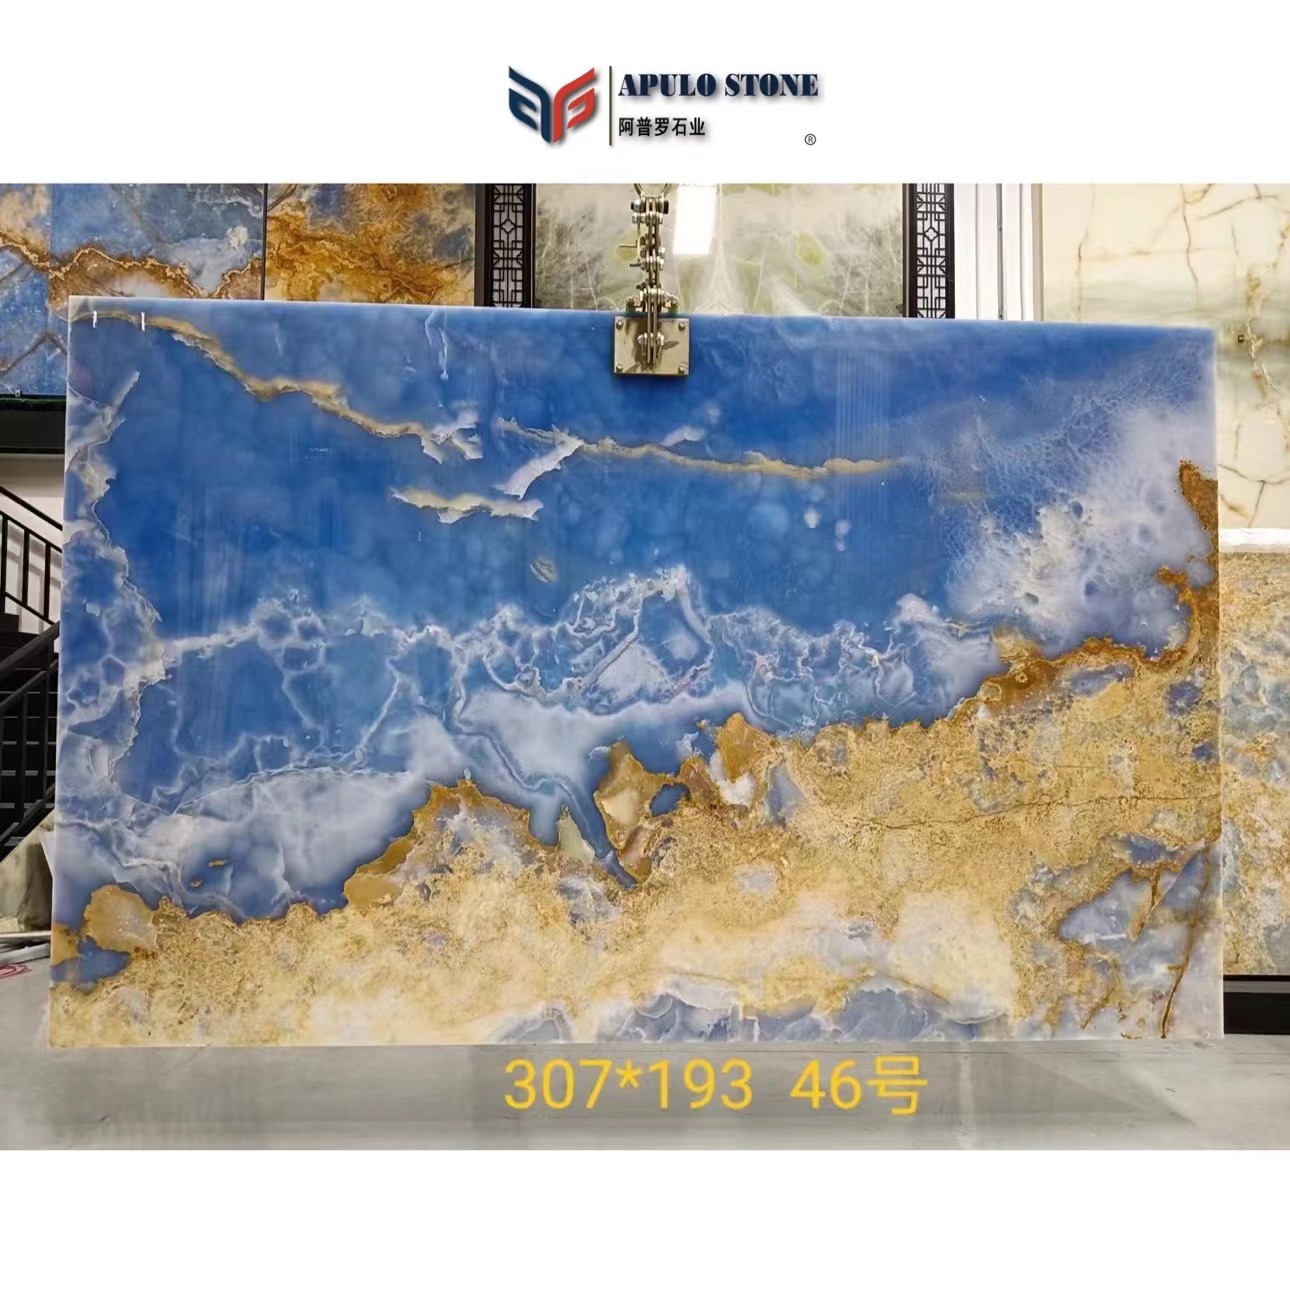 Sky blue marmor onyx bookmatch translucent blue onyx wall panel cladding decoration golden veins marble for wall